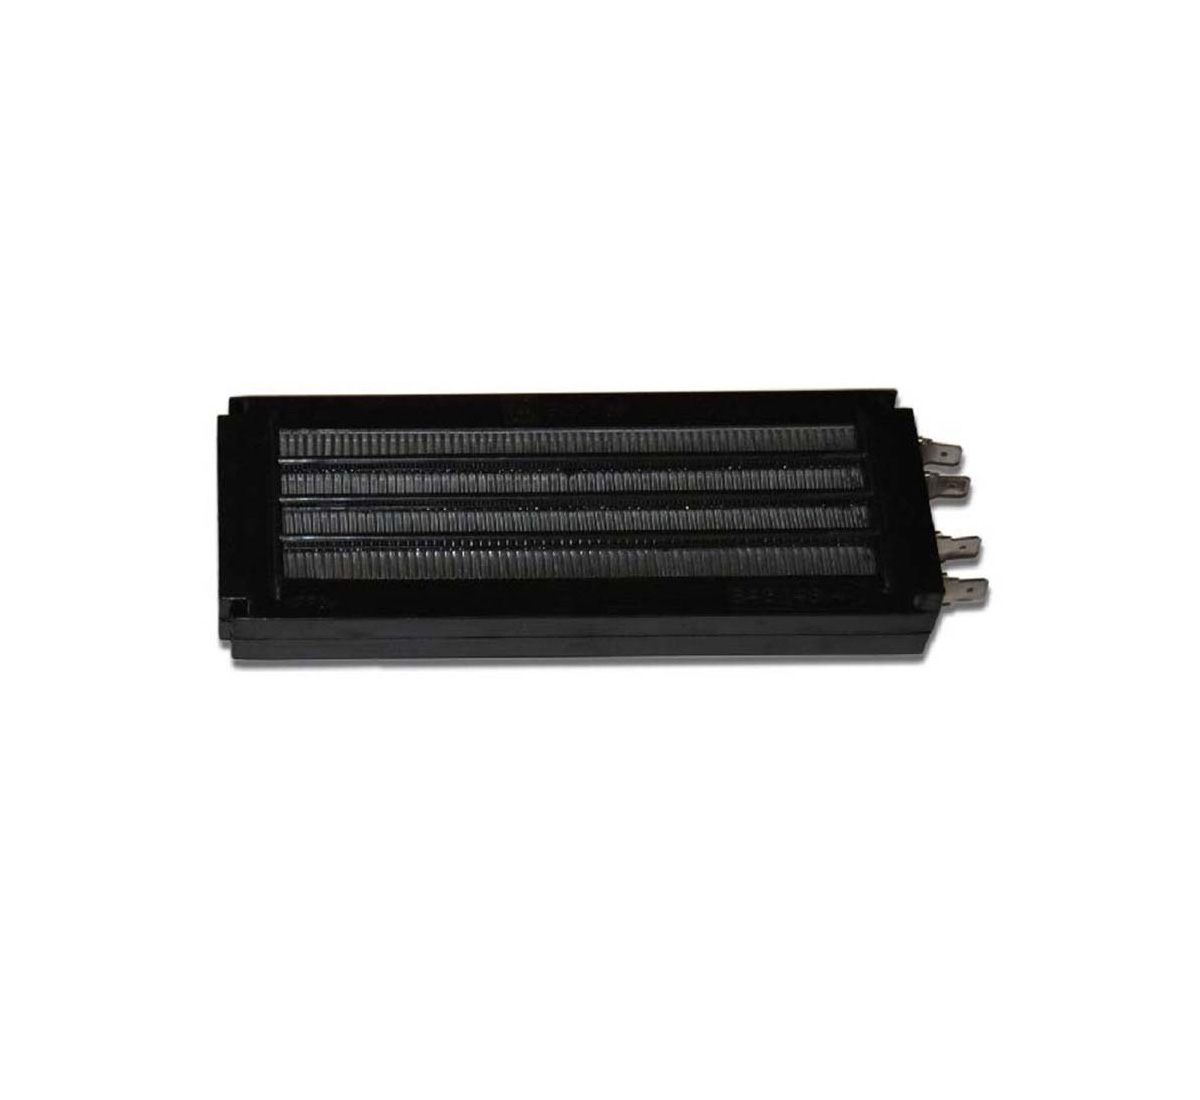 A picture of a PTC heating element, type B46-96-4